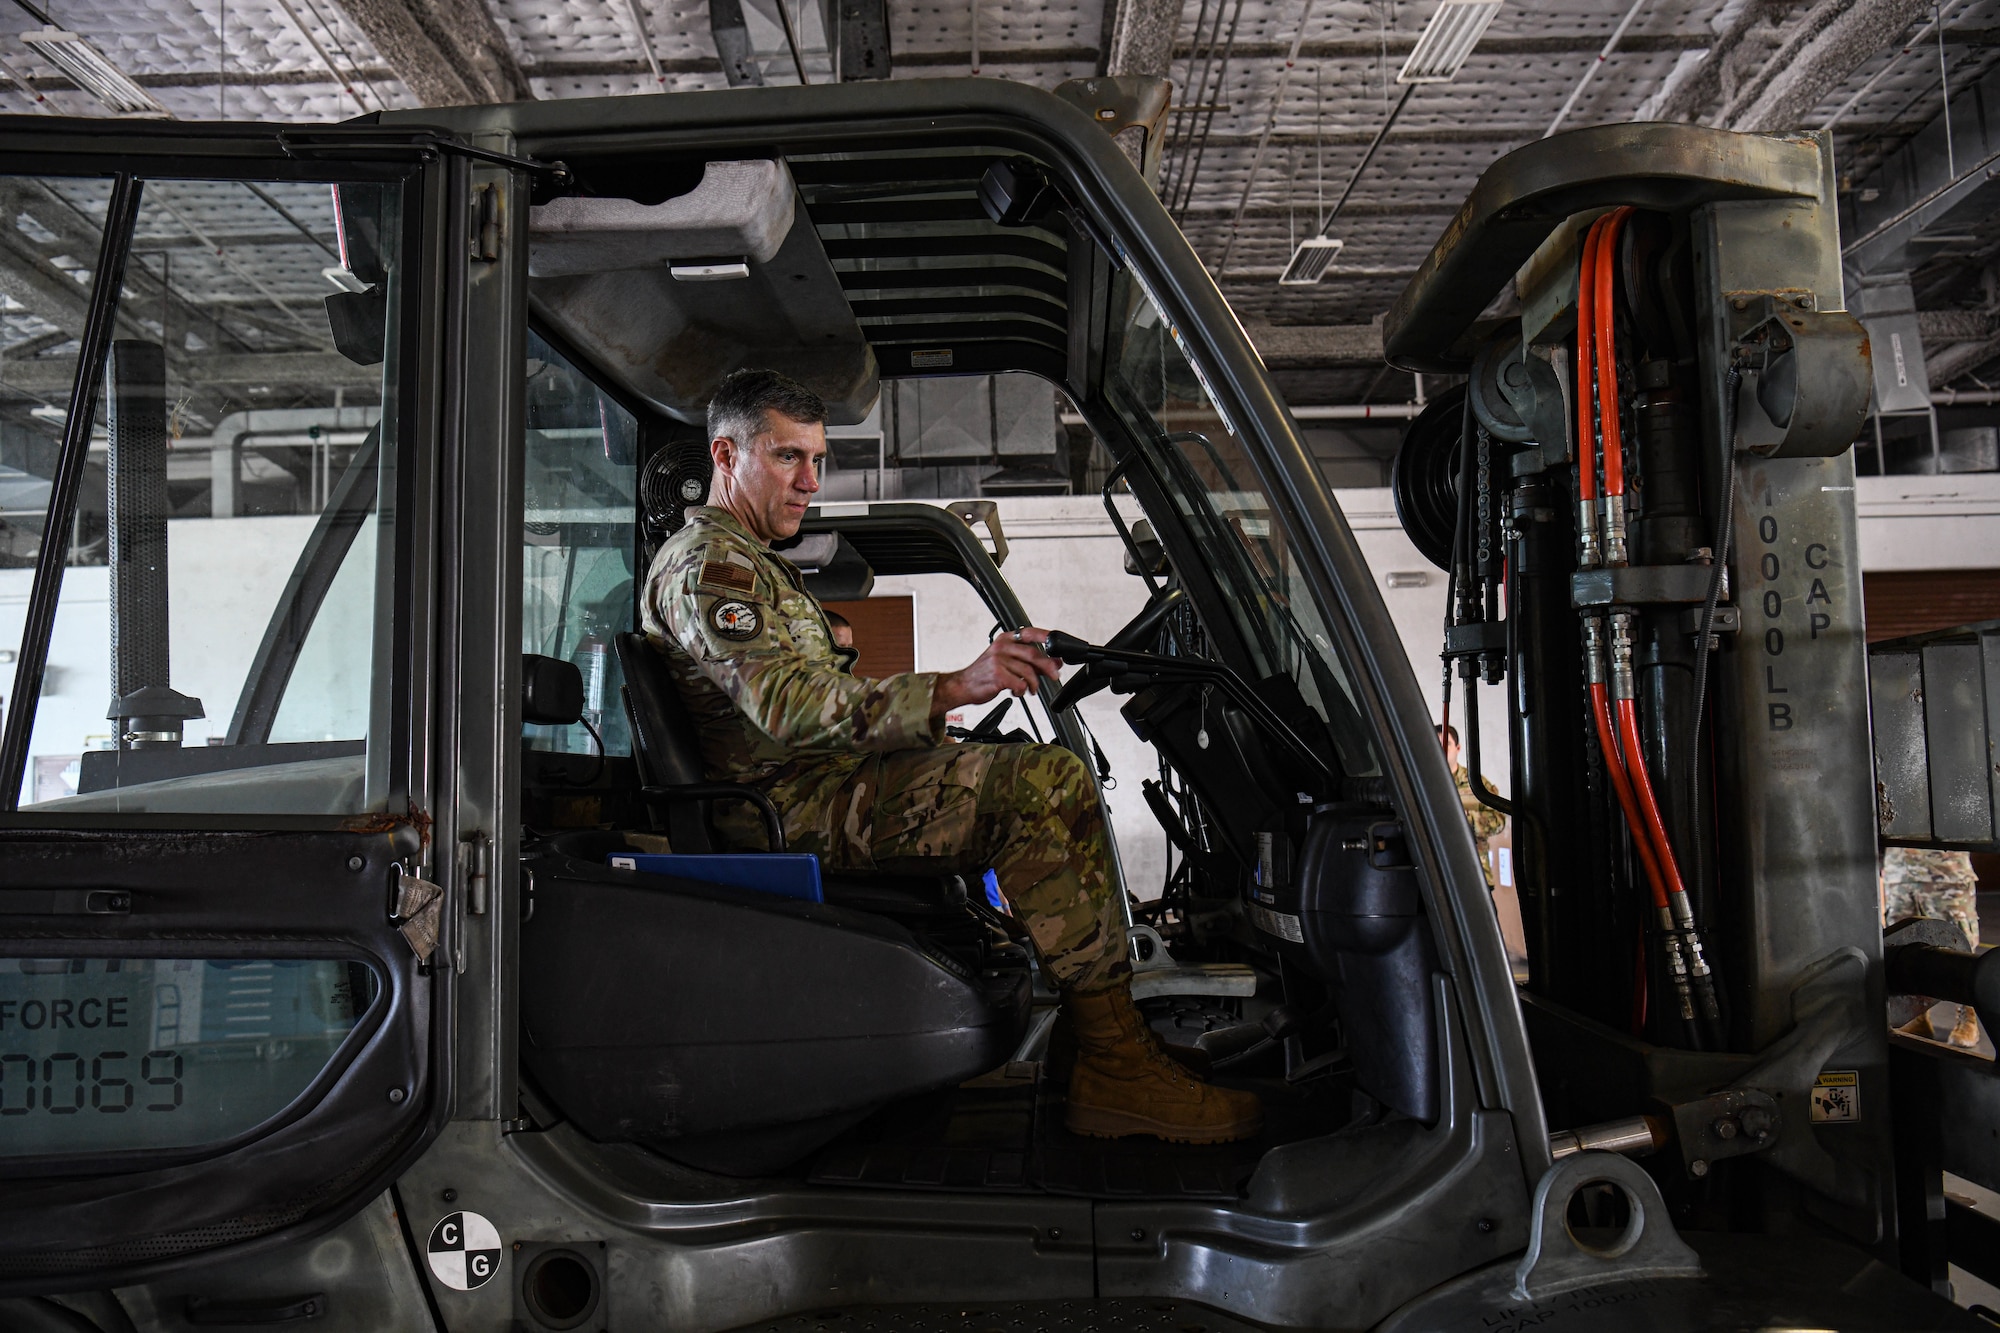 Maj. Gen. John Klein, U.S. Air Force Expeditionary Center commander, operates a forklift at Andersen Air Force Base, Guam, Dec. 2, 2023. Throughout the day, the USAFEC command team had the opportunity to experience aerial port and maintenance day-to-day tasks to get a better understanding of their mission.